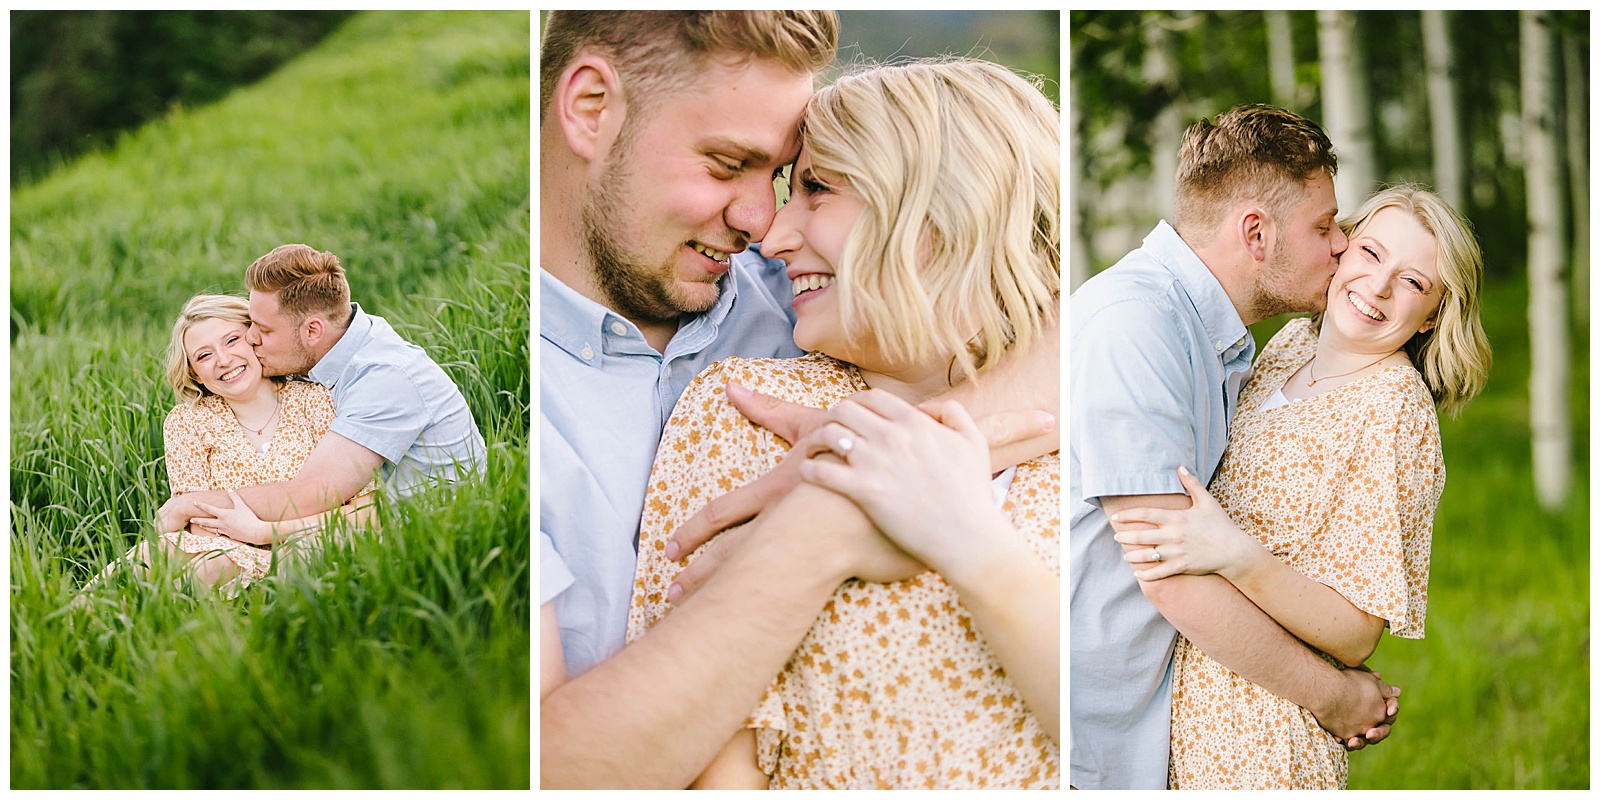 Swan Valley engagement session